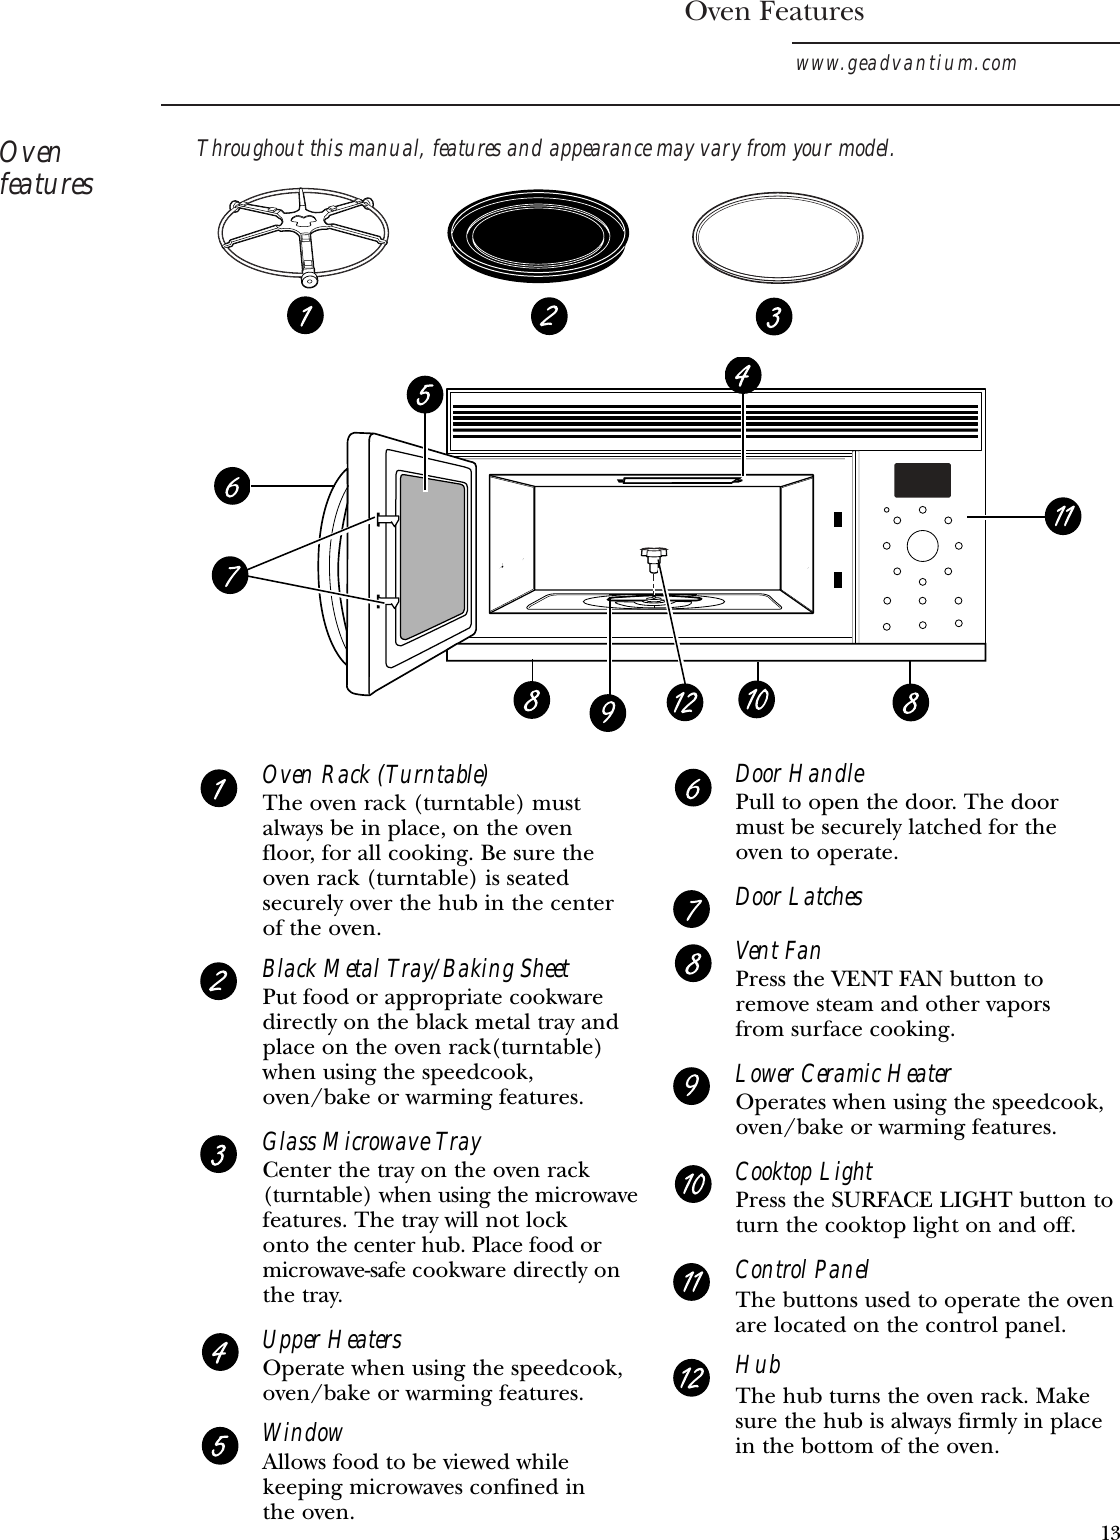 Oven Featureswww.geadvantium.comOvenfeaturesThroughout this manual, features and appearance may vary from your model.Oven Rack (Turntable)The oven rack (turntable) must always be in place, on the oven floor, for all cooking. Be sure the oven rack (turntable) is seated securely over the hub in the center of the oven. Black Metal Tray/Baking SheetPut food or appropriate cookware directly on the black metal tray and place on the oven rack(turntable) when using the speedcook, oven/bake or warming features. Glass Microwave TrayCenter the tray on the oven rack(turntable) when using the microwavefeatures. The tray will not lock onto the center hub. Place food ormicrowave-safe cookware directly onthe tray.Upper HeatersOperate when using the speedcook, oven/bake or warming features. WindowAllows food to be viewed while keeping microwaves confined in the oven.Door HandlePull to open the door. The door must be securely latched for the oven to operate.Door LatchesVent FanPress the VENT FAN button to remove steam and other vapors from surface cooking.Lower Ceramic HeaterOperates when using the speedcook, oven/bake or warming features.Cooktop LightPress the SURFACE LIGHT button to turn the cooktop light on and off.Control PanelThe buttons used to operate the oven are located on the control panel.HubThe hub turns the oven rack. Makesure the hub is always firmly in placein the bottom of the oven.13